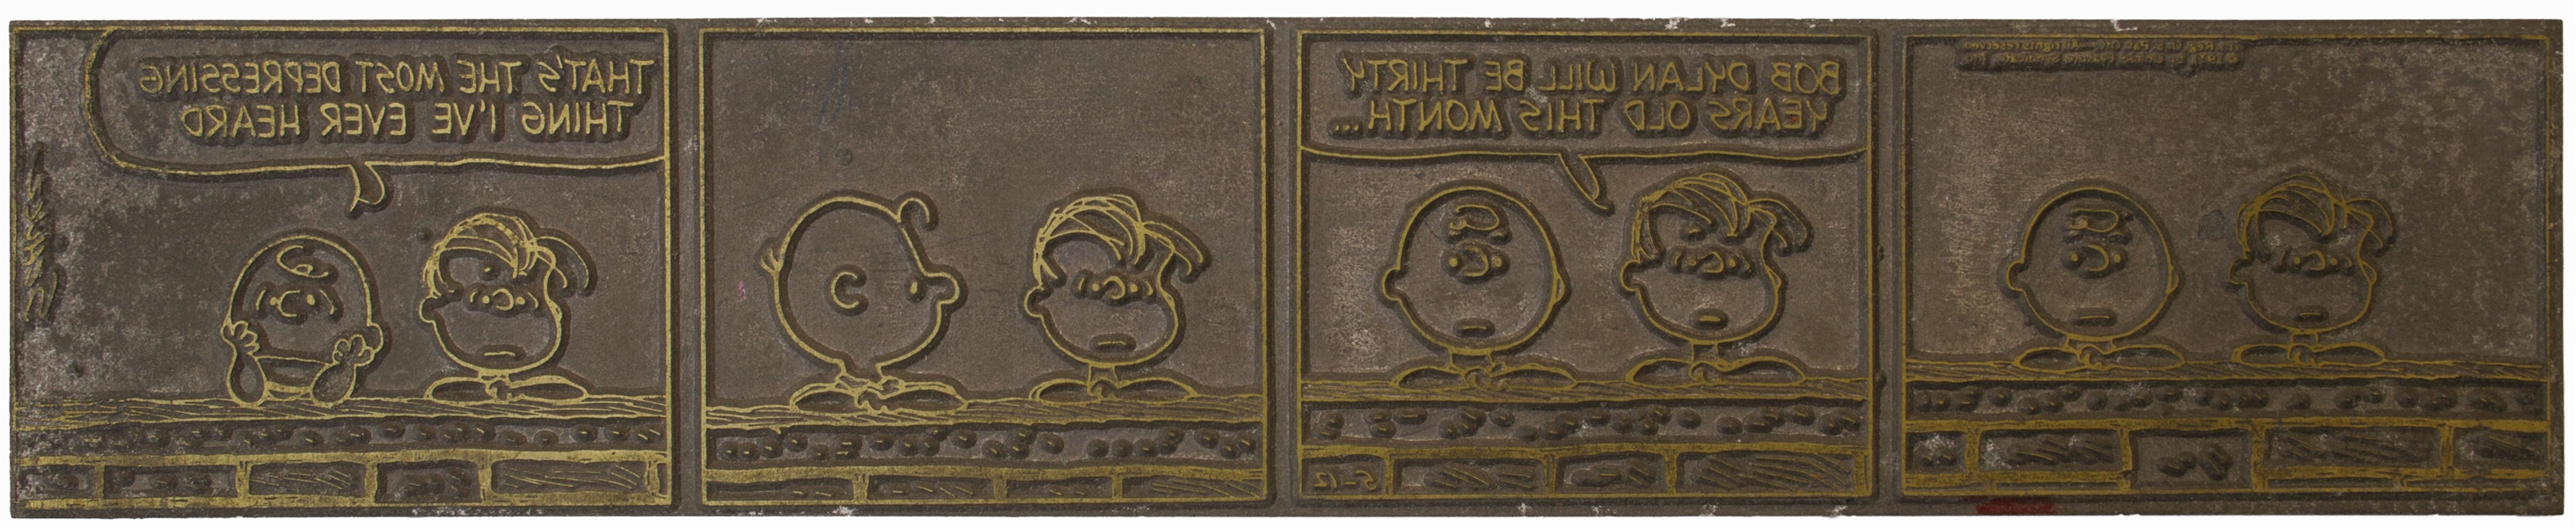 Original Printing Plate for the Famous 1971 ''Peanuts'' Comic Strip Celebrating Bob Dylan's 30th Birthday -- Plus 12 Other Original Comic Printing Plates Including Four More for ''Peanuts''